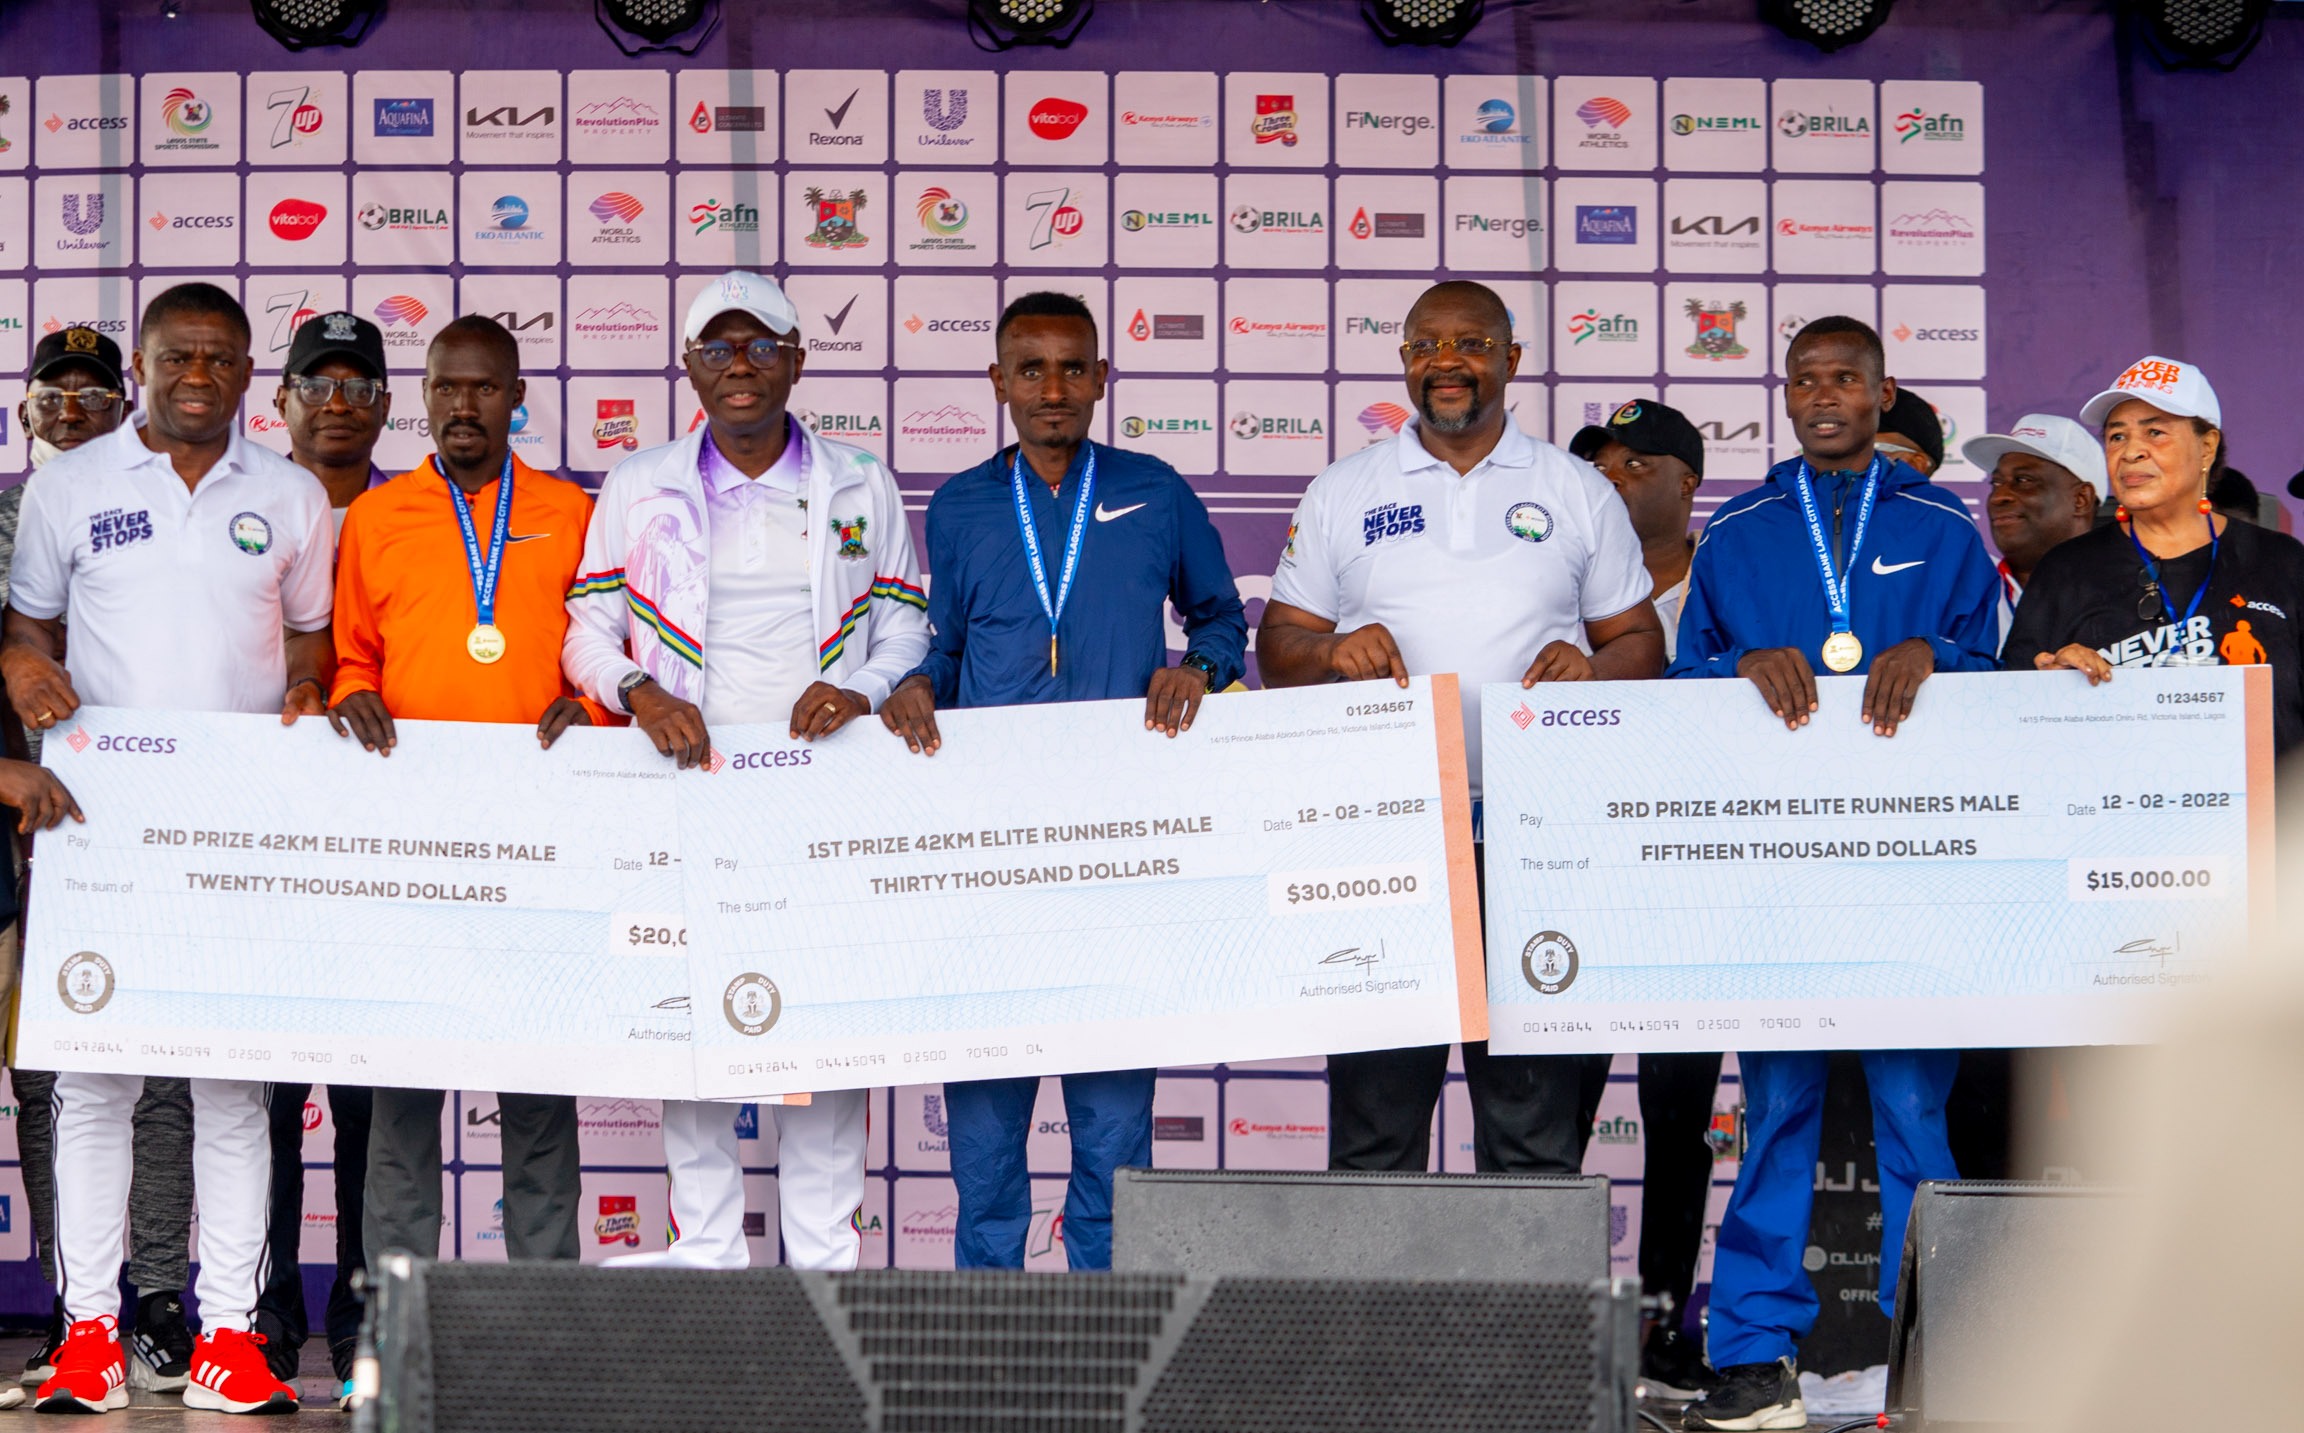 ETHIOPIAN NATIONALS WIN $60,000 FIRST PRIZE IN LAGOS CITY MARATHON, AS SANWO-OLU RACES WITH ATHLETES